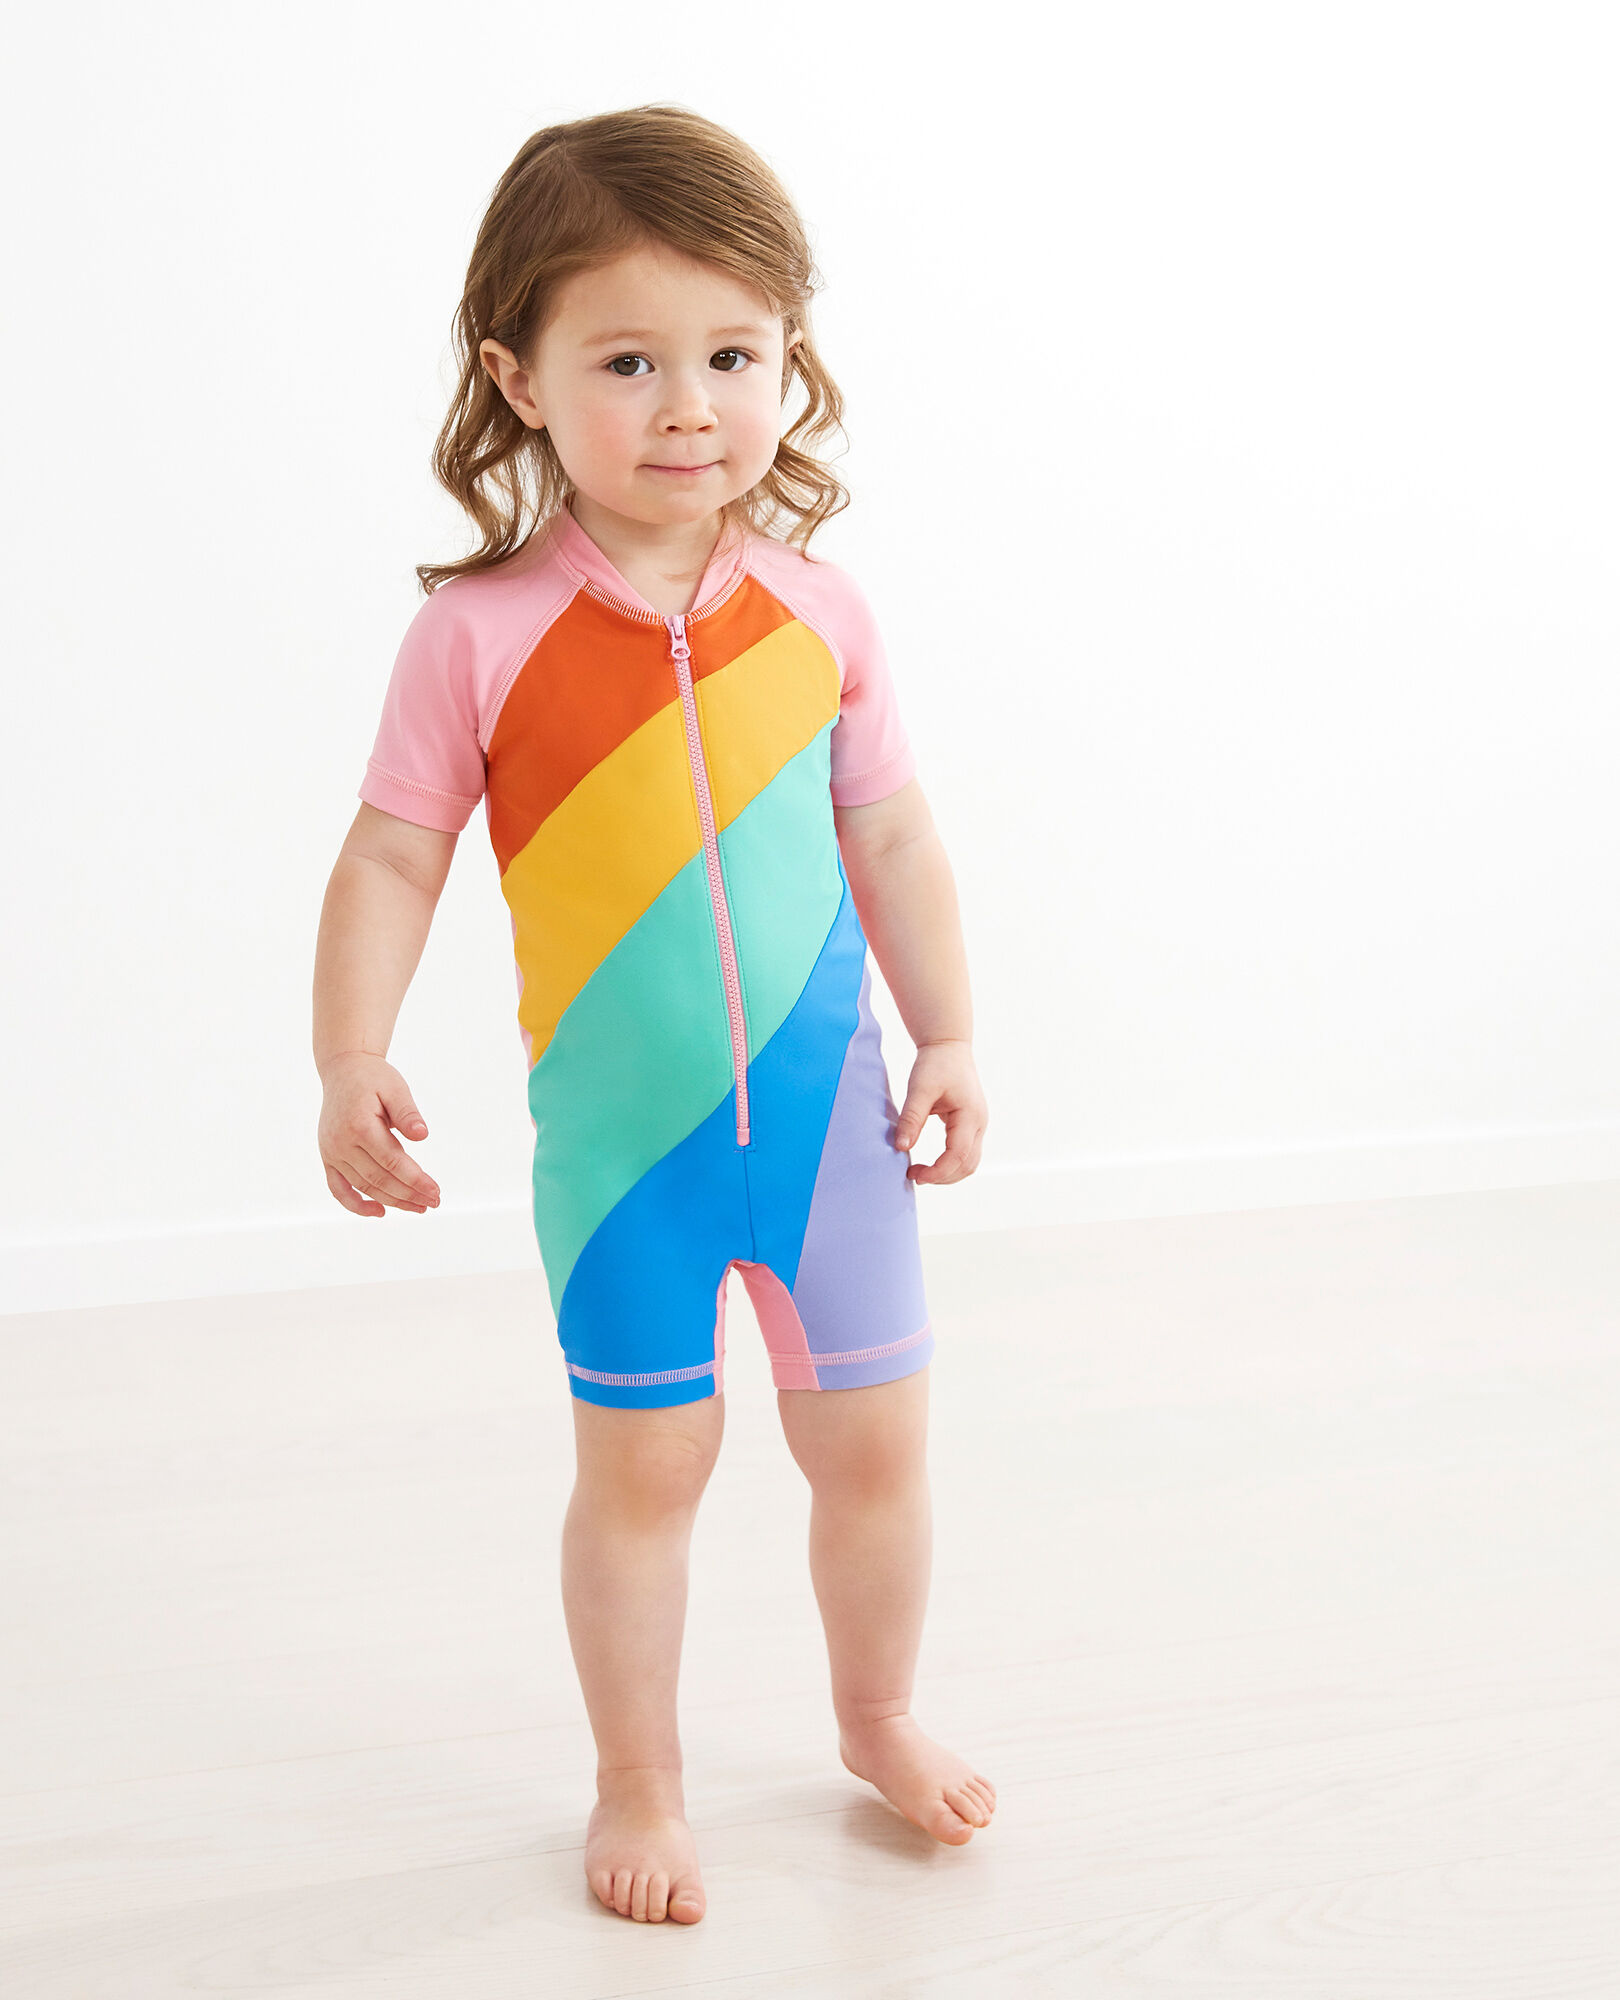 Fashion NWOT HANNA ANDERSSON STORYTIME RAINBOW RECYCLED L/S RASH GUARD  SWIMSUIT 90 3 $40 GO10207609